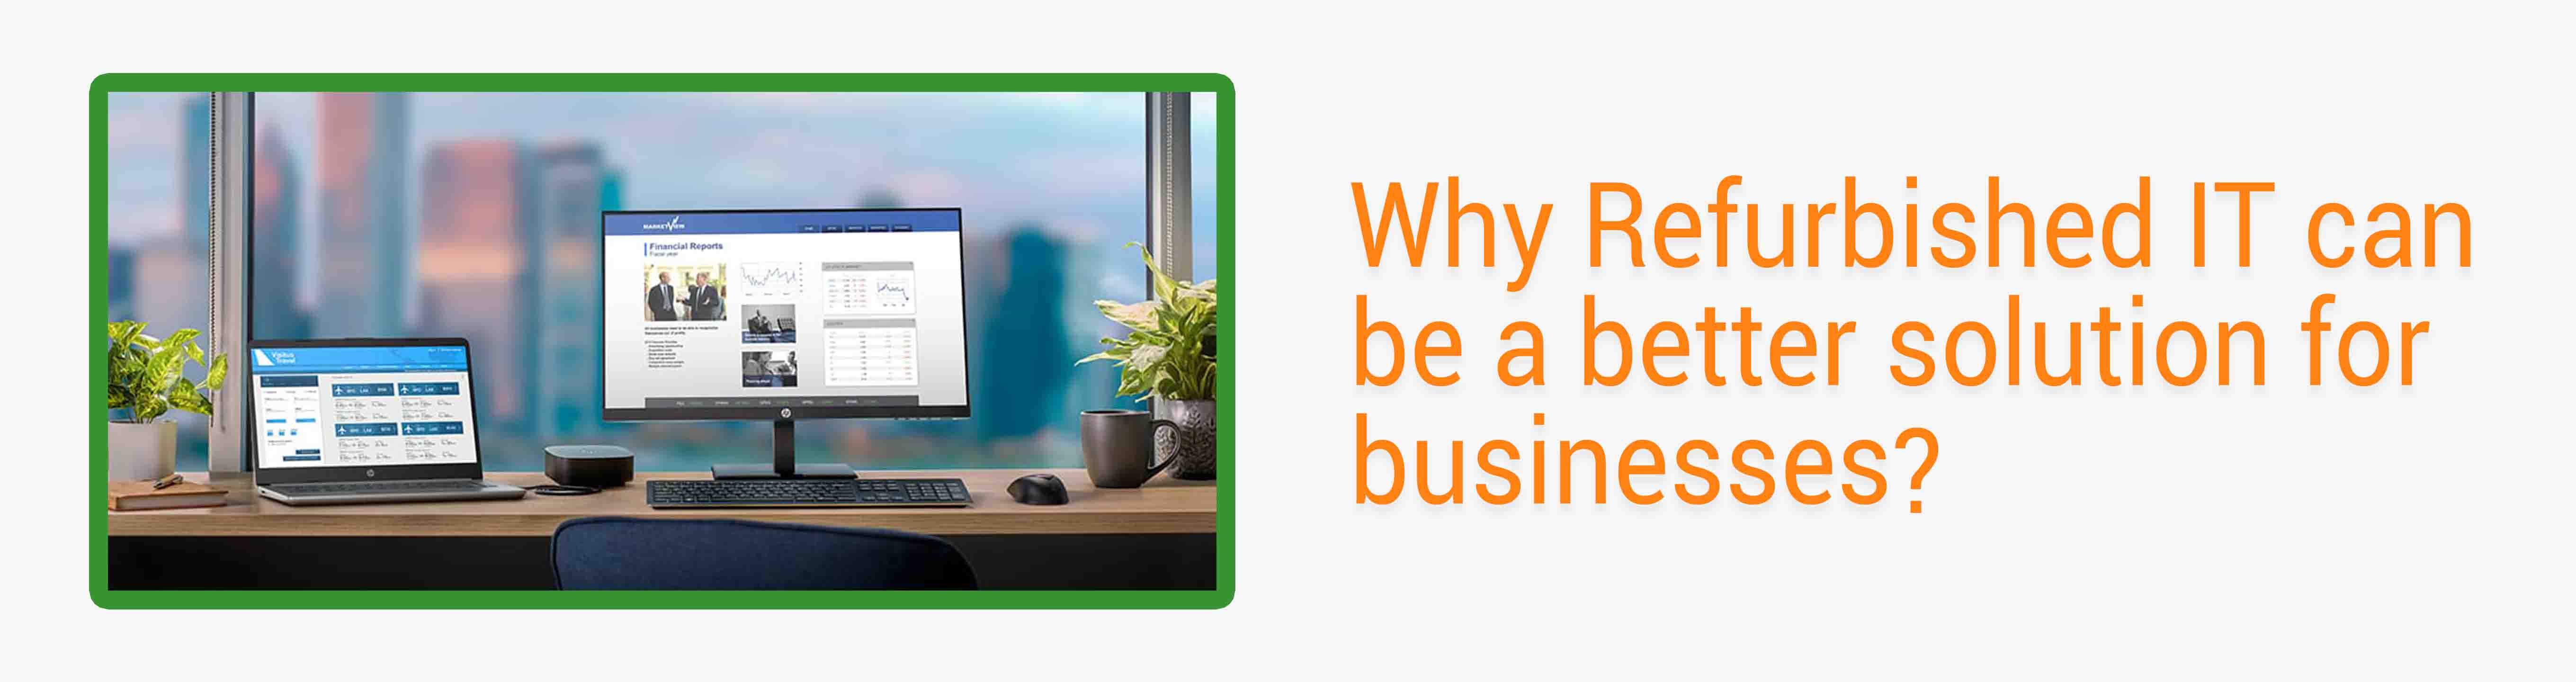 Why can refurbished IT be a better solution for businesses?